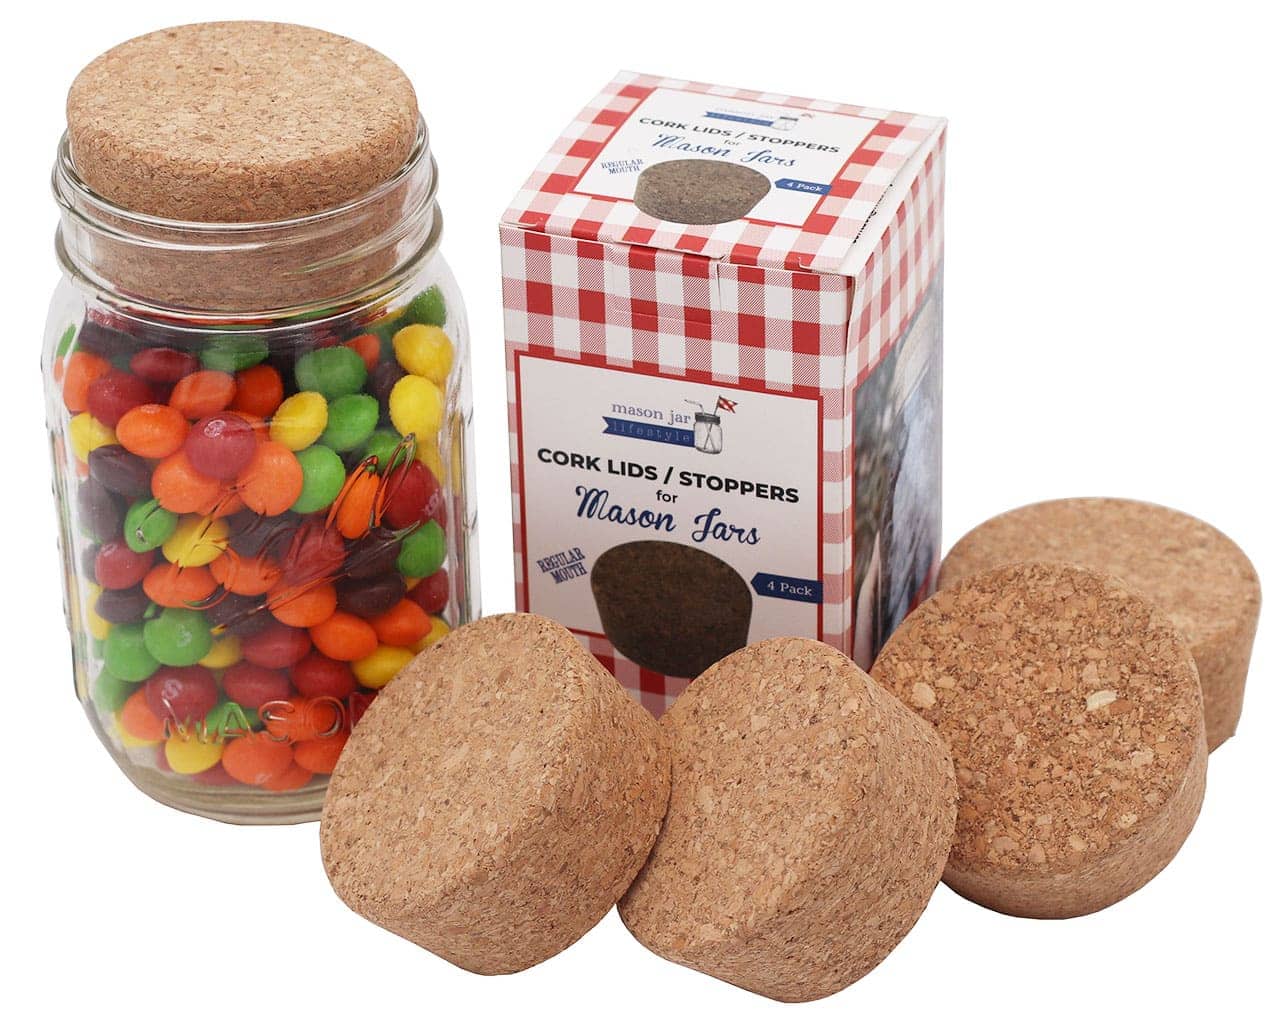 Are Glass Jars With Cork Lids Good For Storing, Preserving